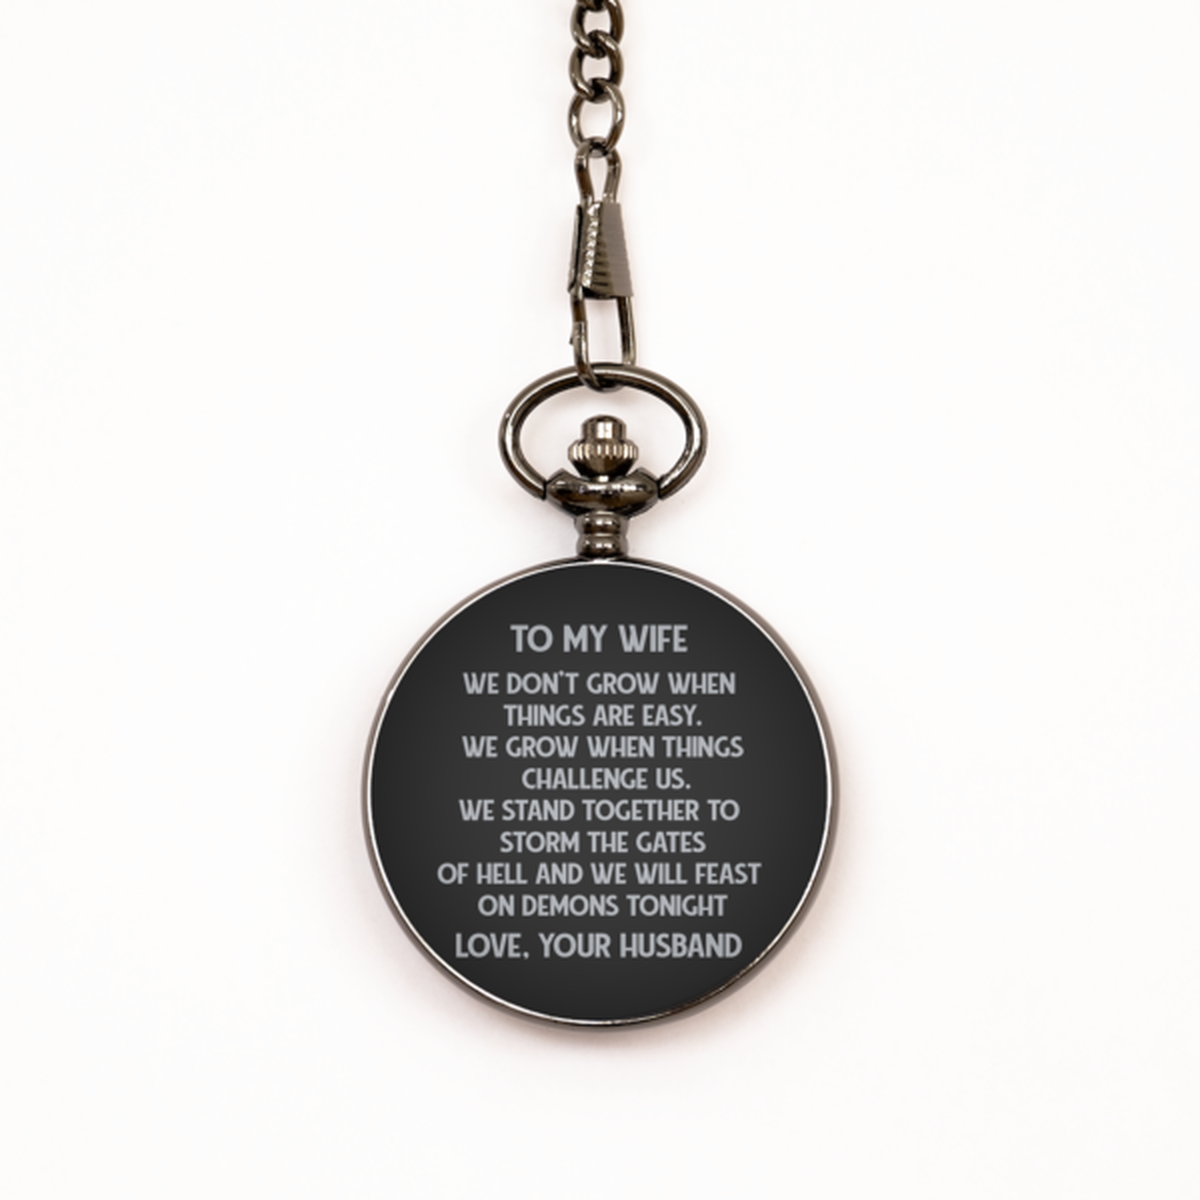 To My Wife Black Pocket Watch, We Stand Together , Birthday Gifts For Wife From Husband, Valentines Gifts For Women